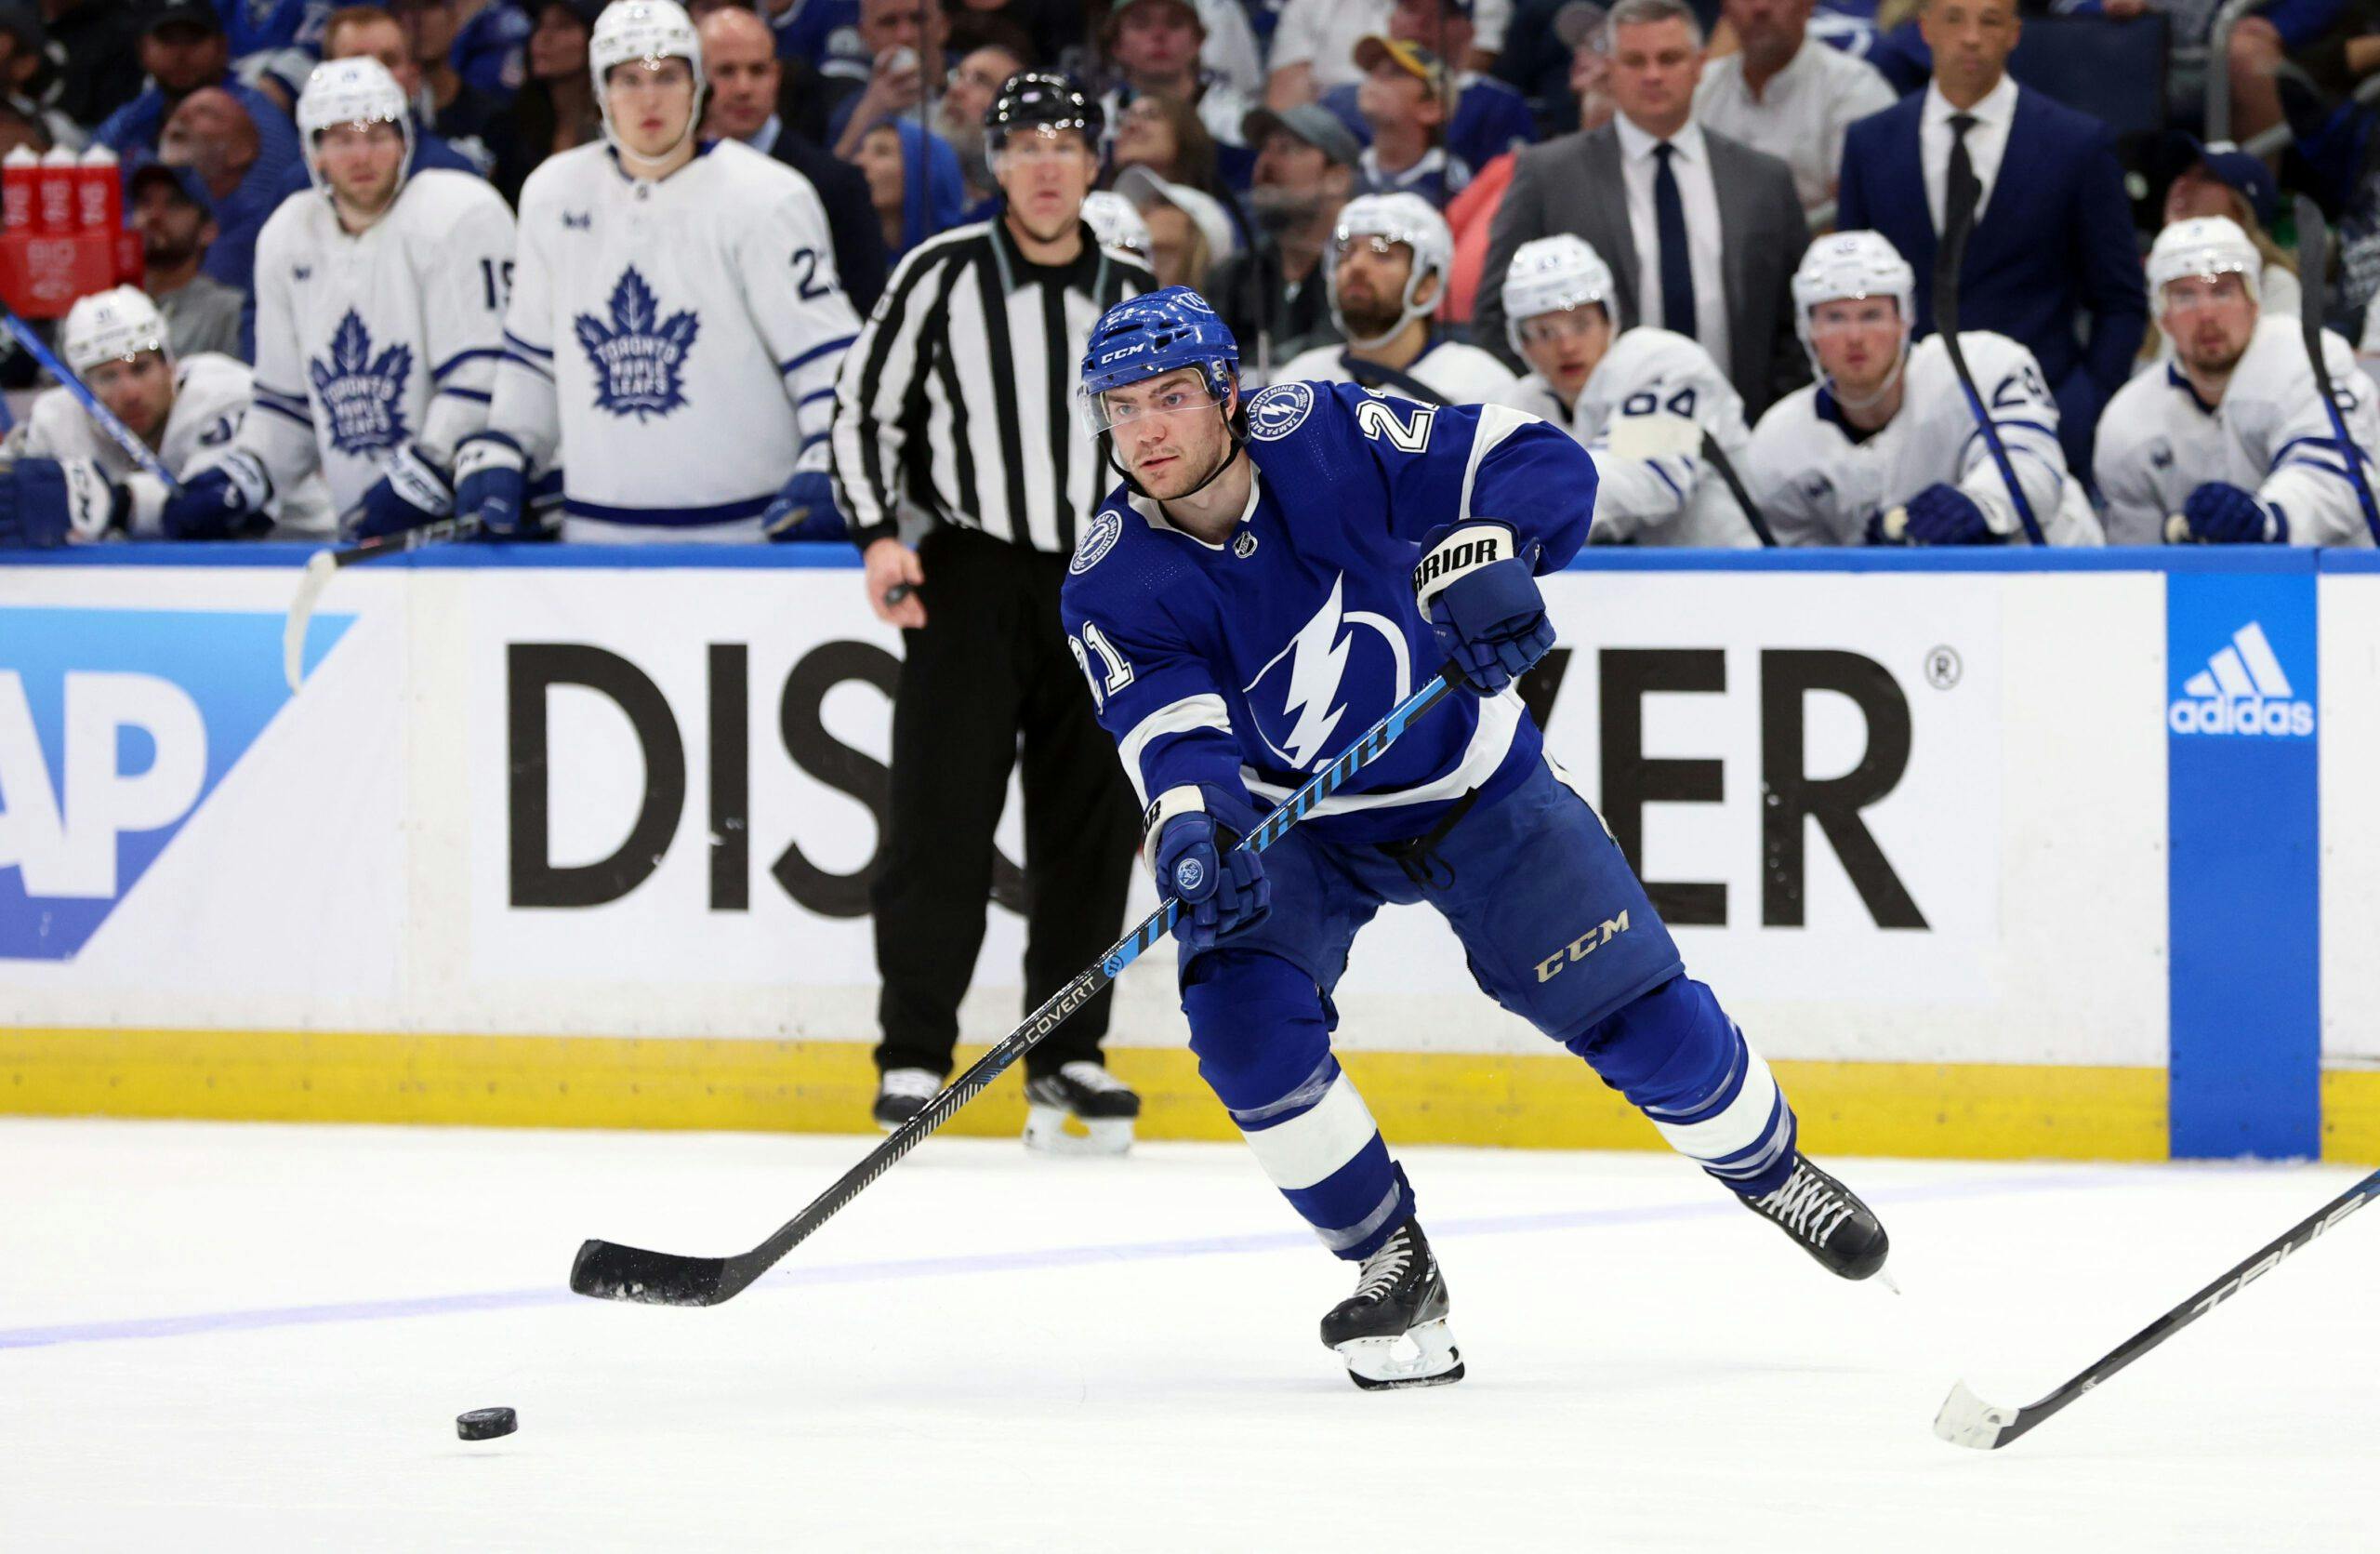 2023-24 NHL team preview: Tampa Bay Lightning - Daily Faceoff